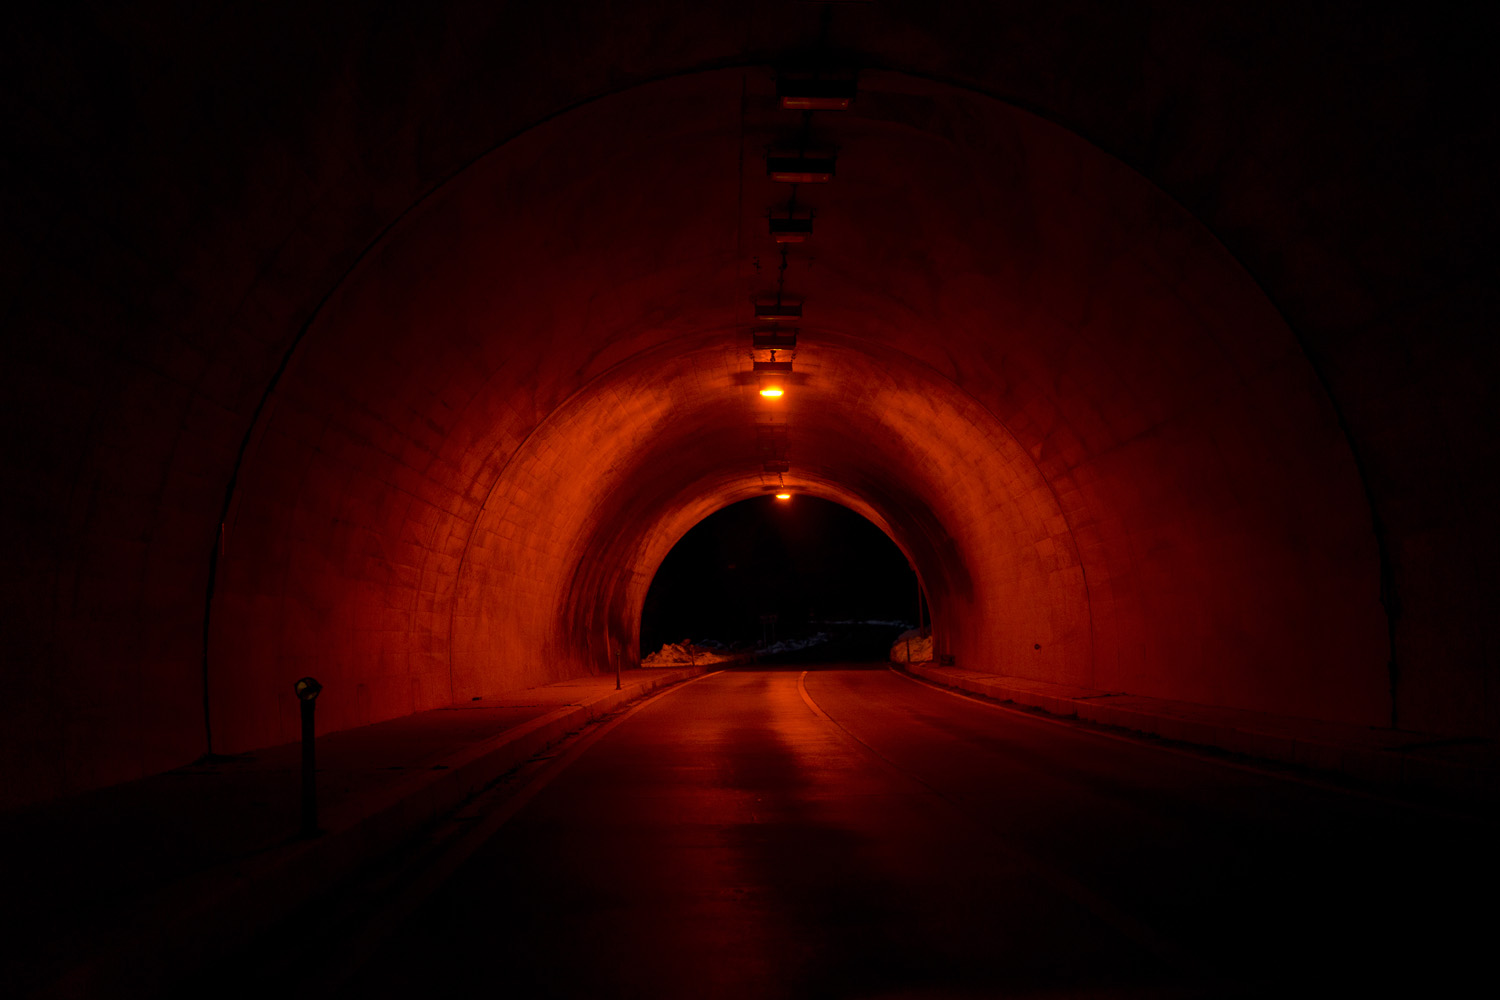 Japan, Namie, 2014. A tunnel is lit by red lights inside the 20-kilometer exclusion zone near the crippled Fukushima Daiichi Nuclear Power Station.